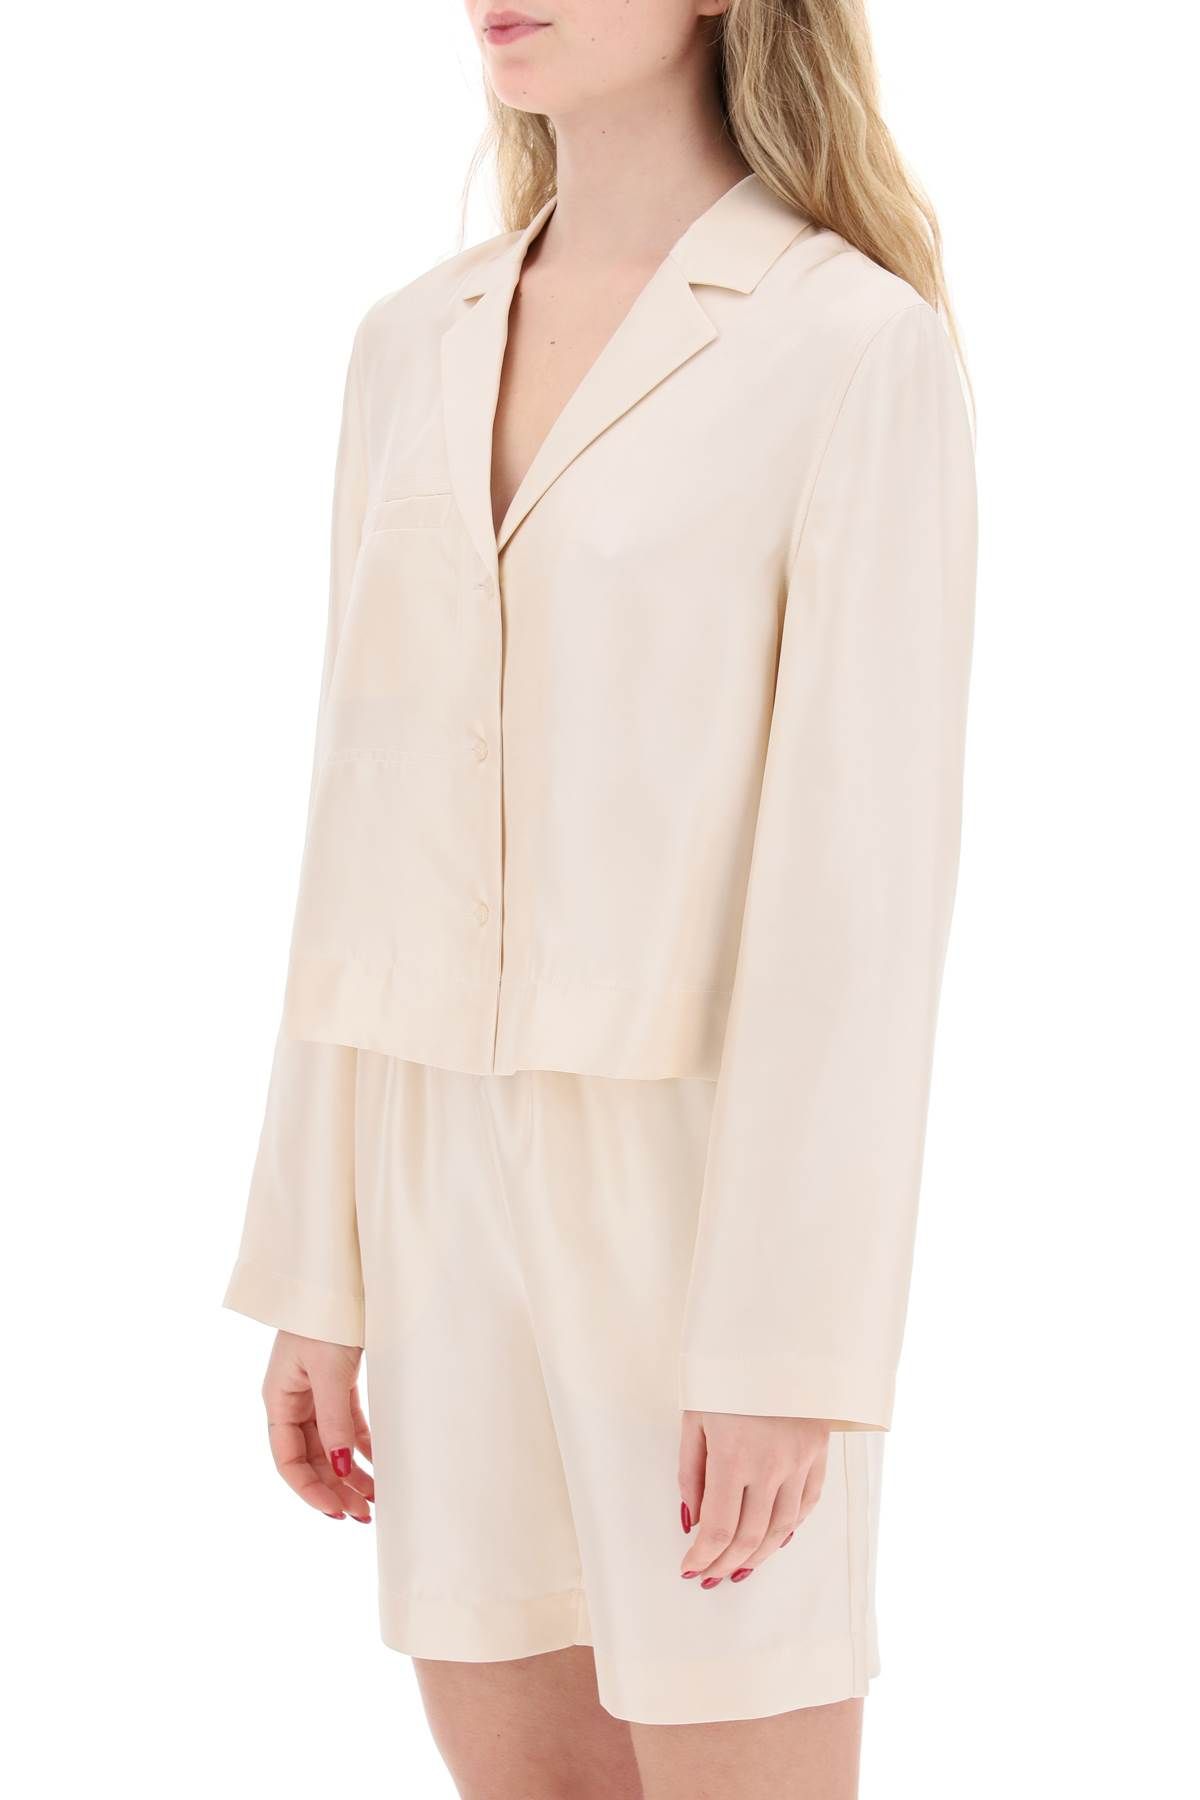 Shop Loulou Studio Silk Aloma Shirt In In Pink